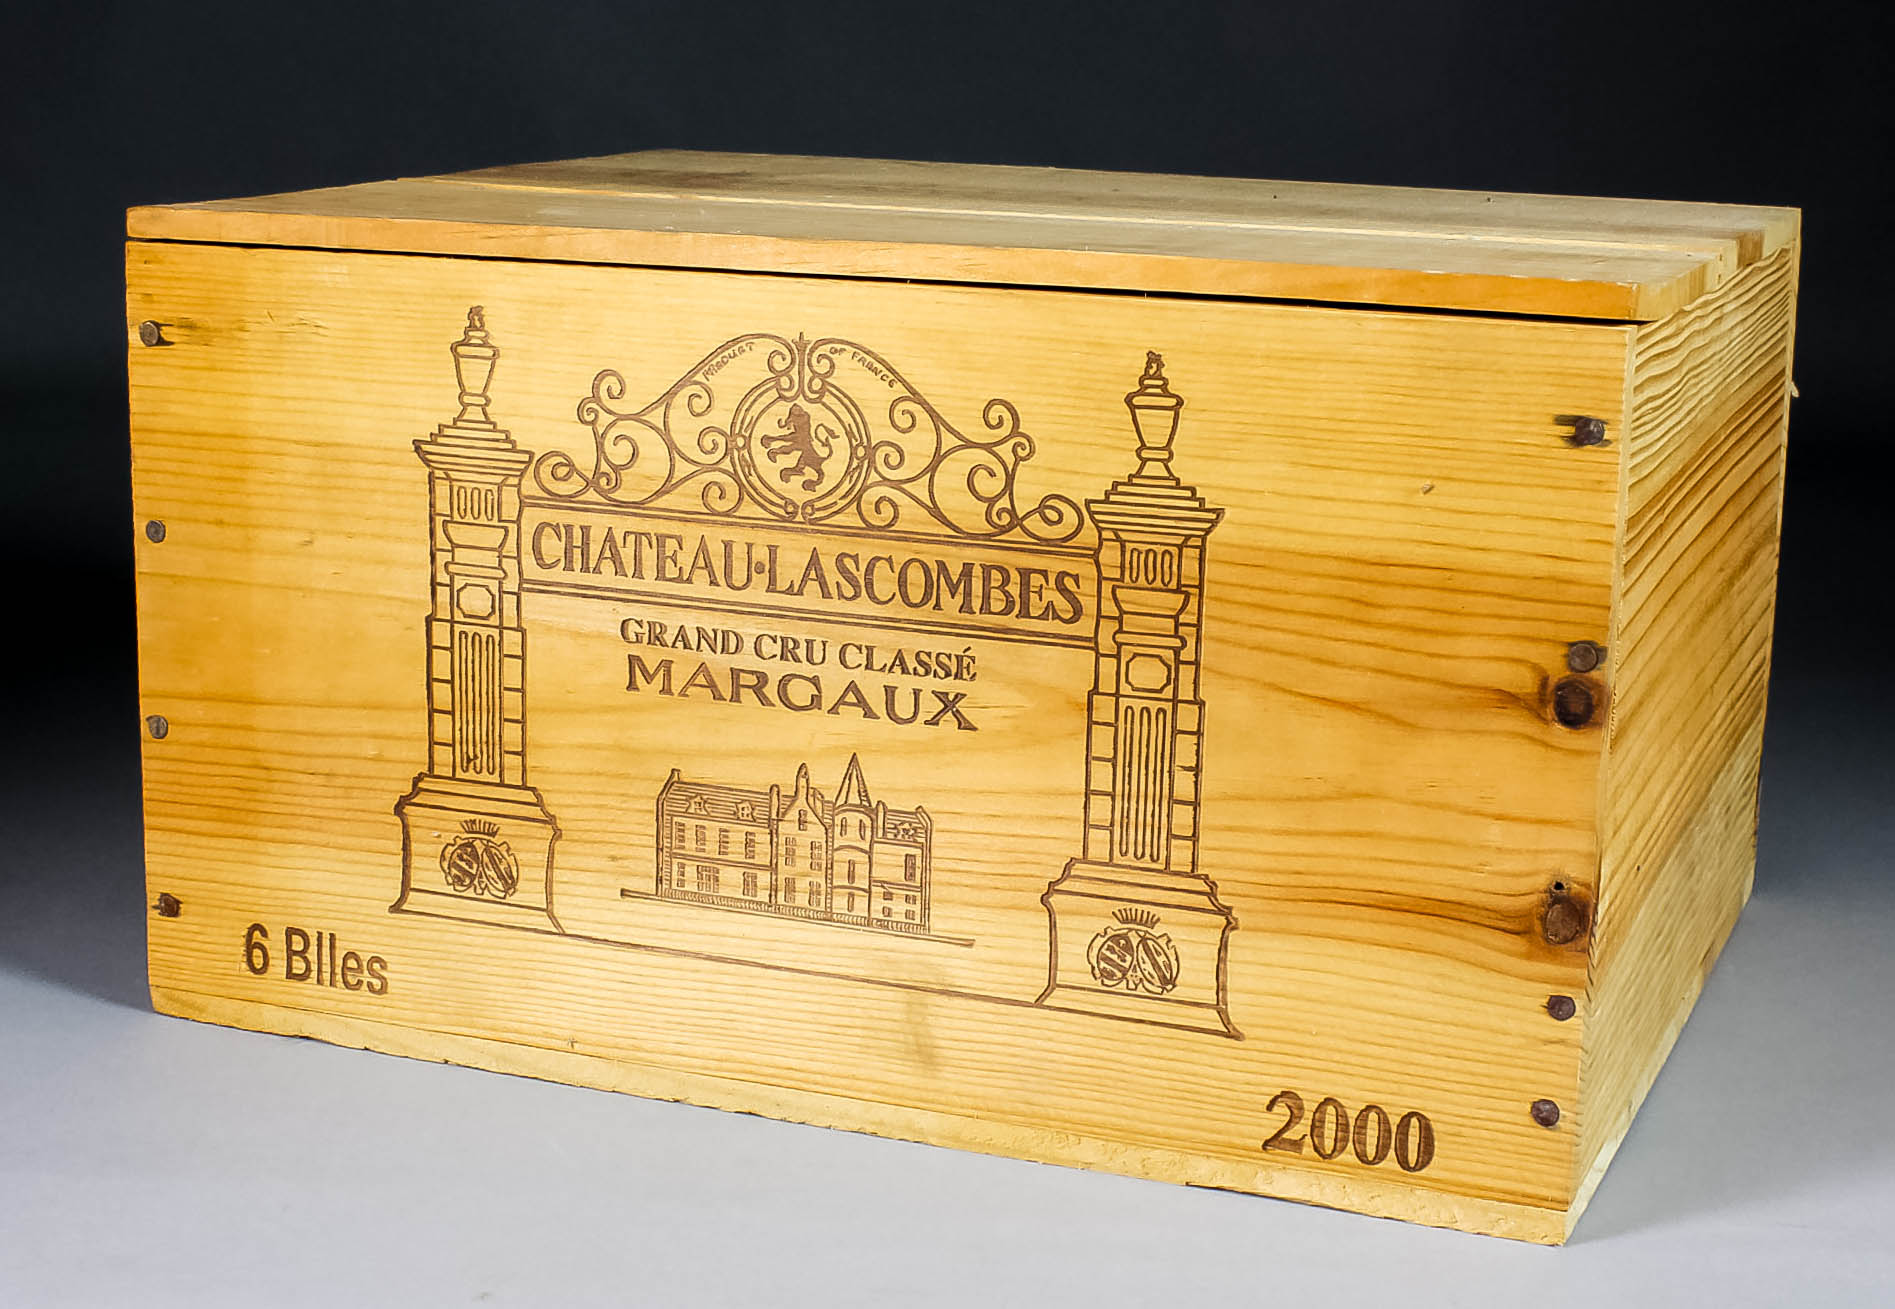 Twelve bottles of 2000 Chateau Lascombes (Grand Cru Classe Margaux) (contained in two sealed six